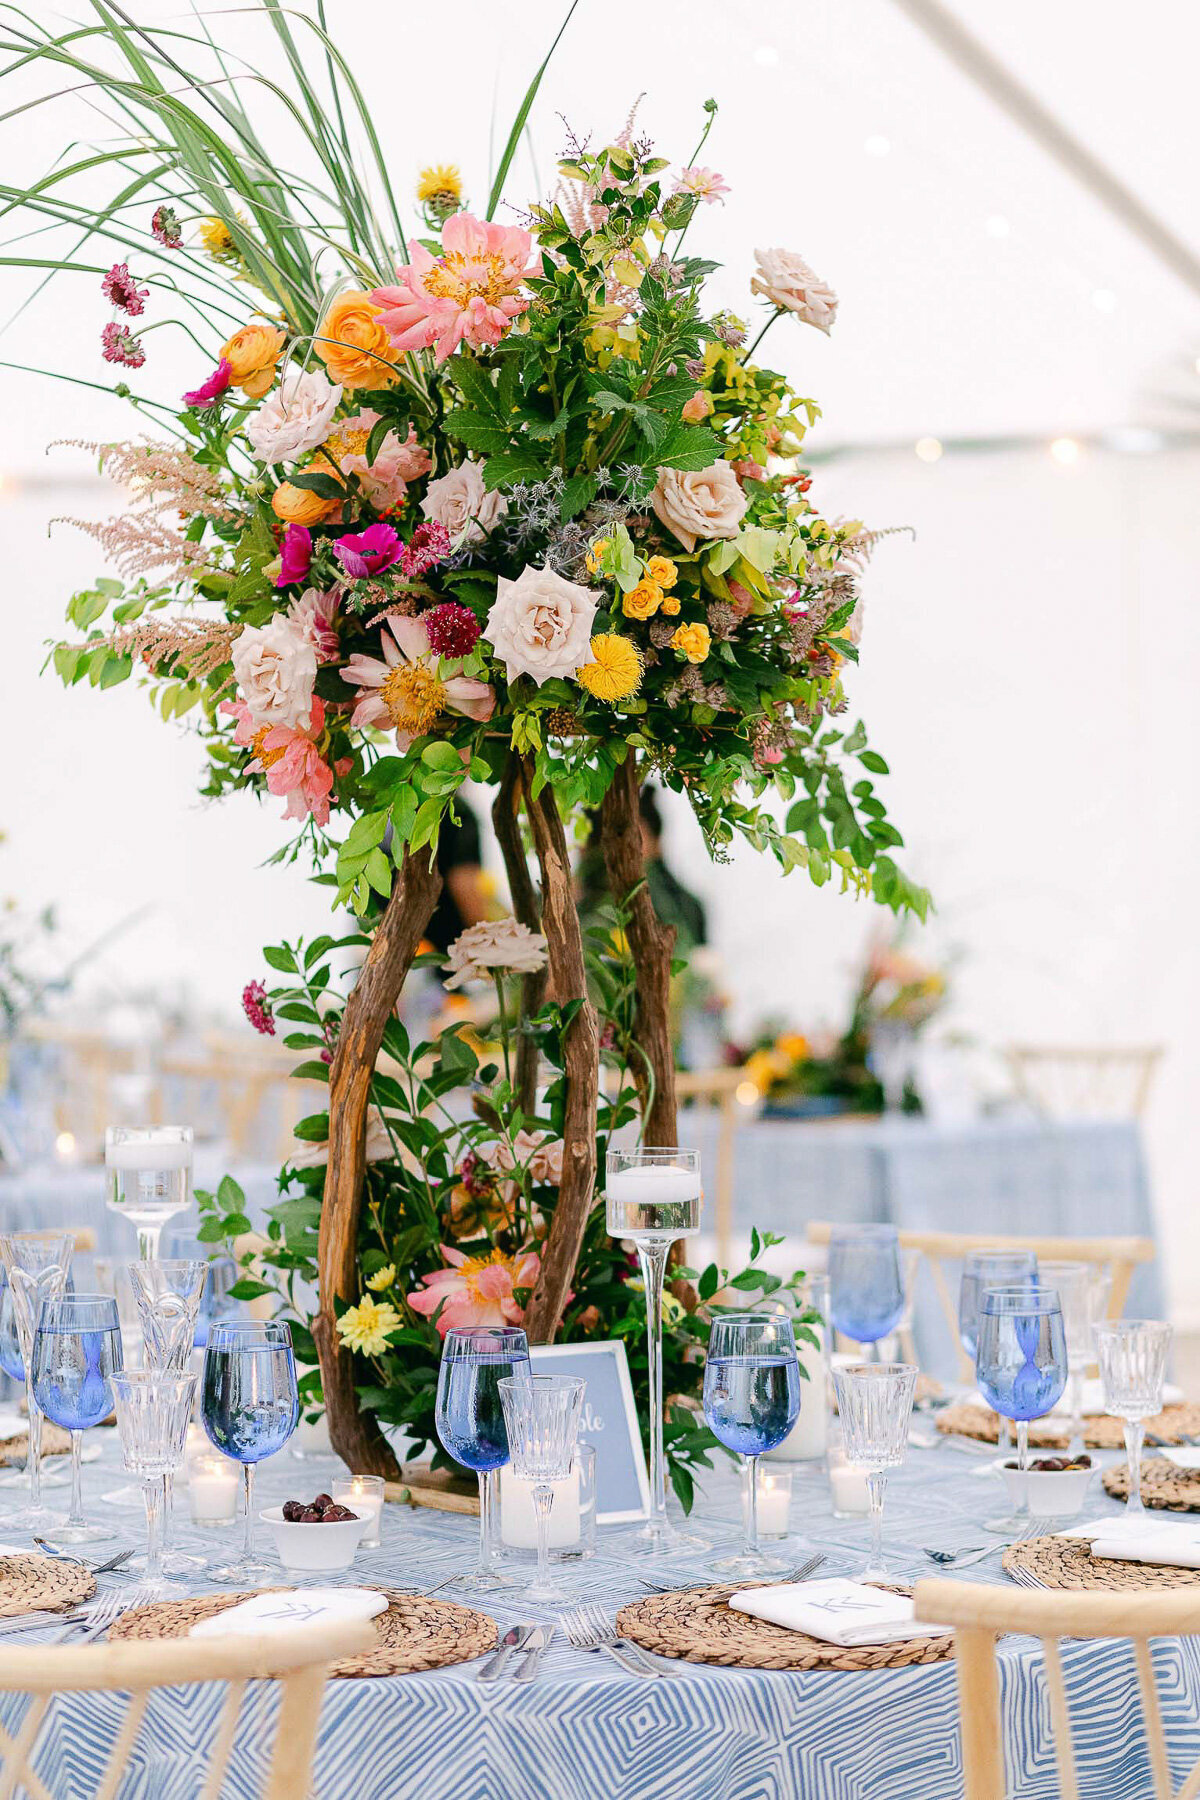 A private tented  beach wedding colorful table decor